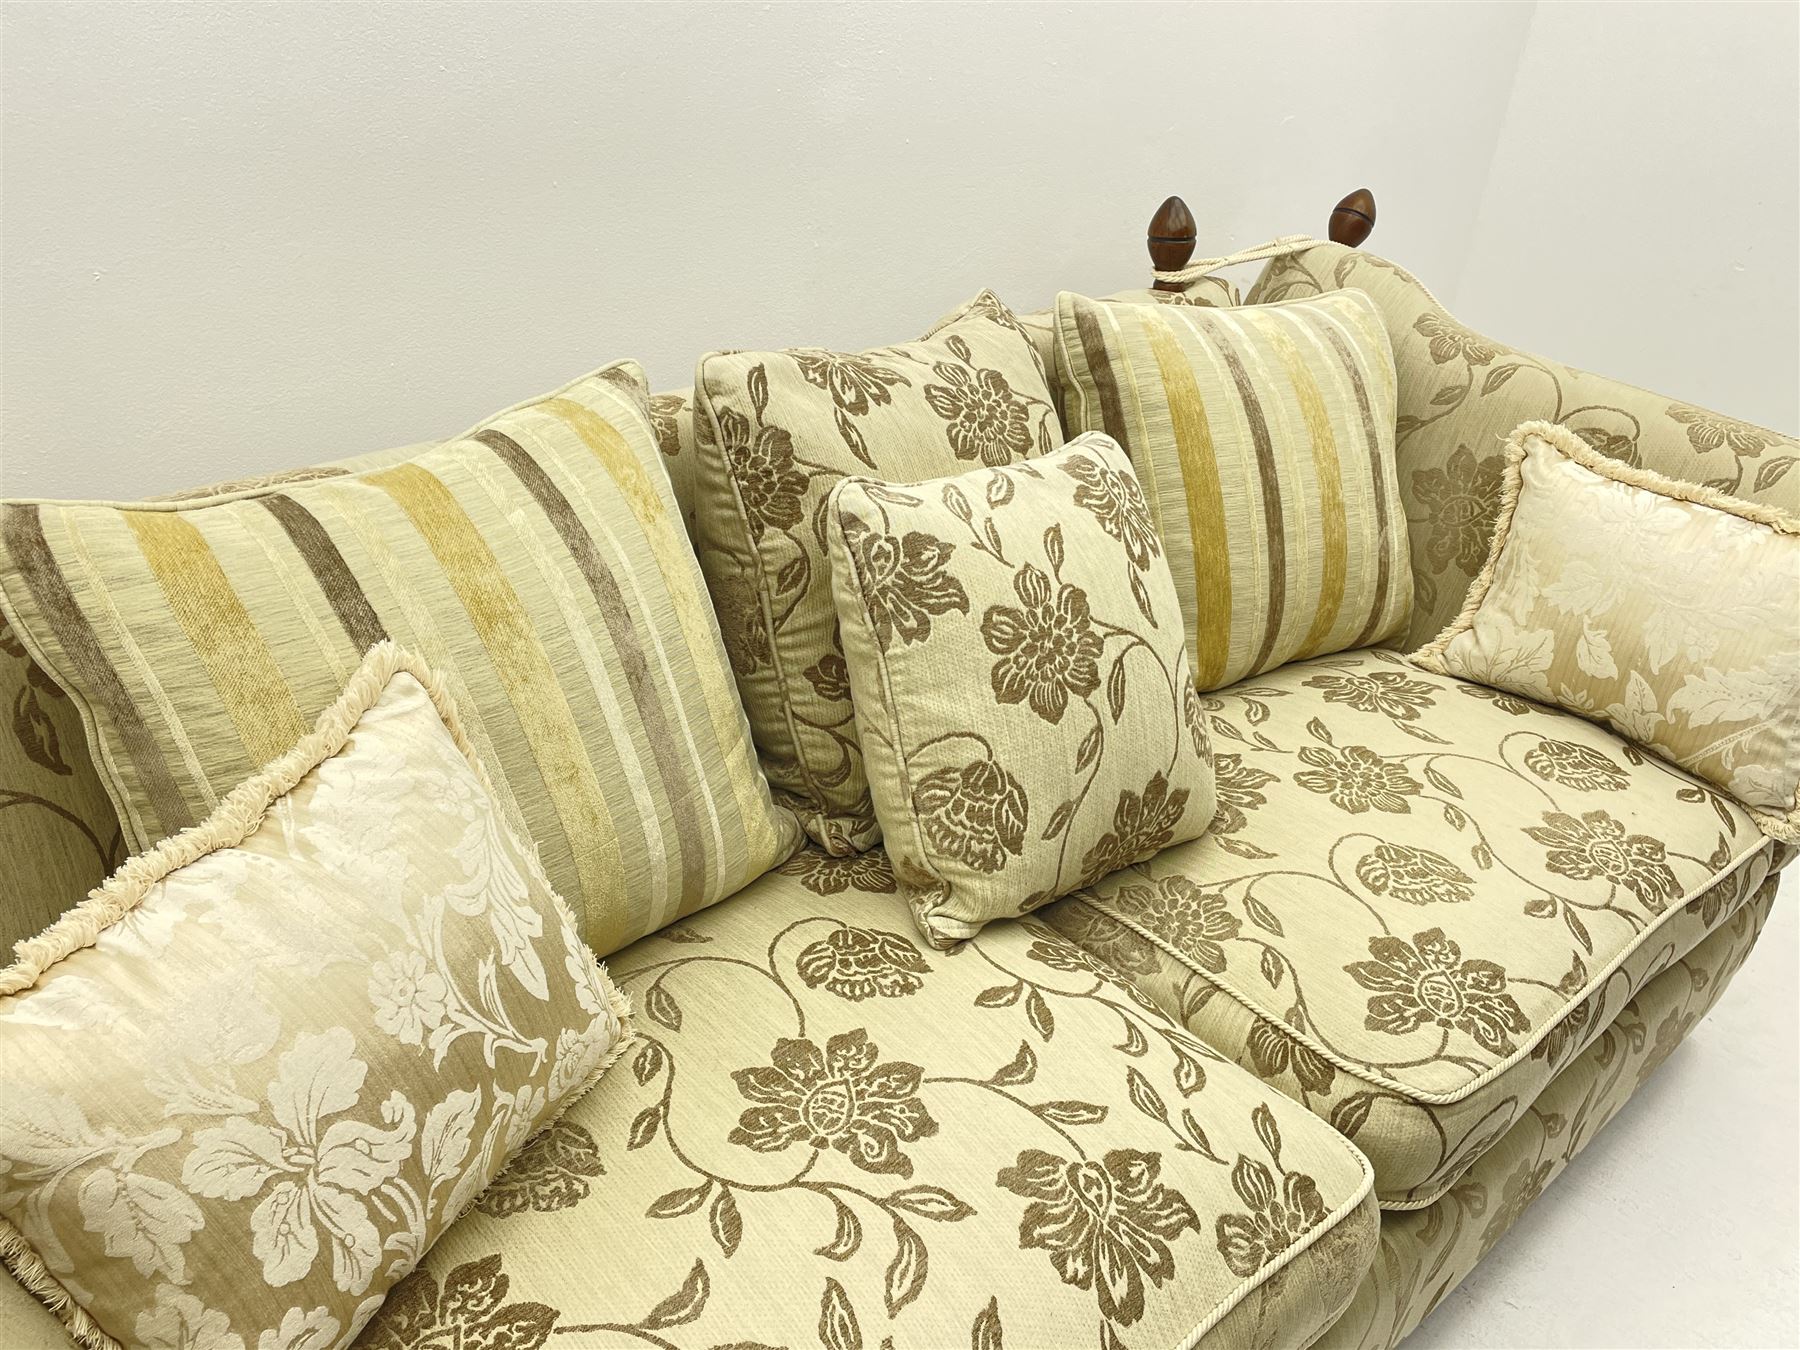 Grande Knole drop arm three seat sofa upholstered in pale fabric with raised floral pattern - Image 3 of 4